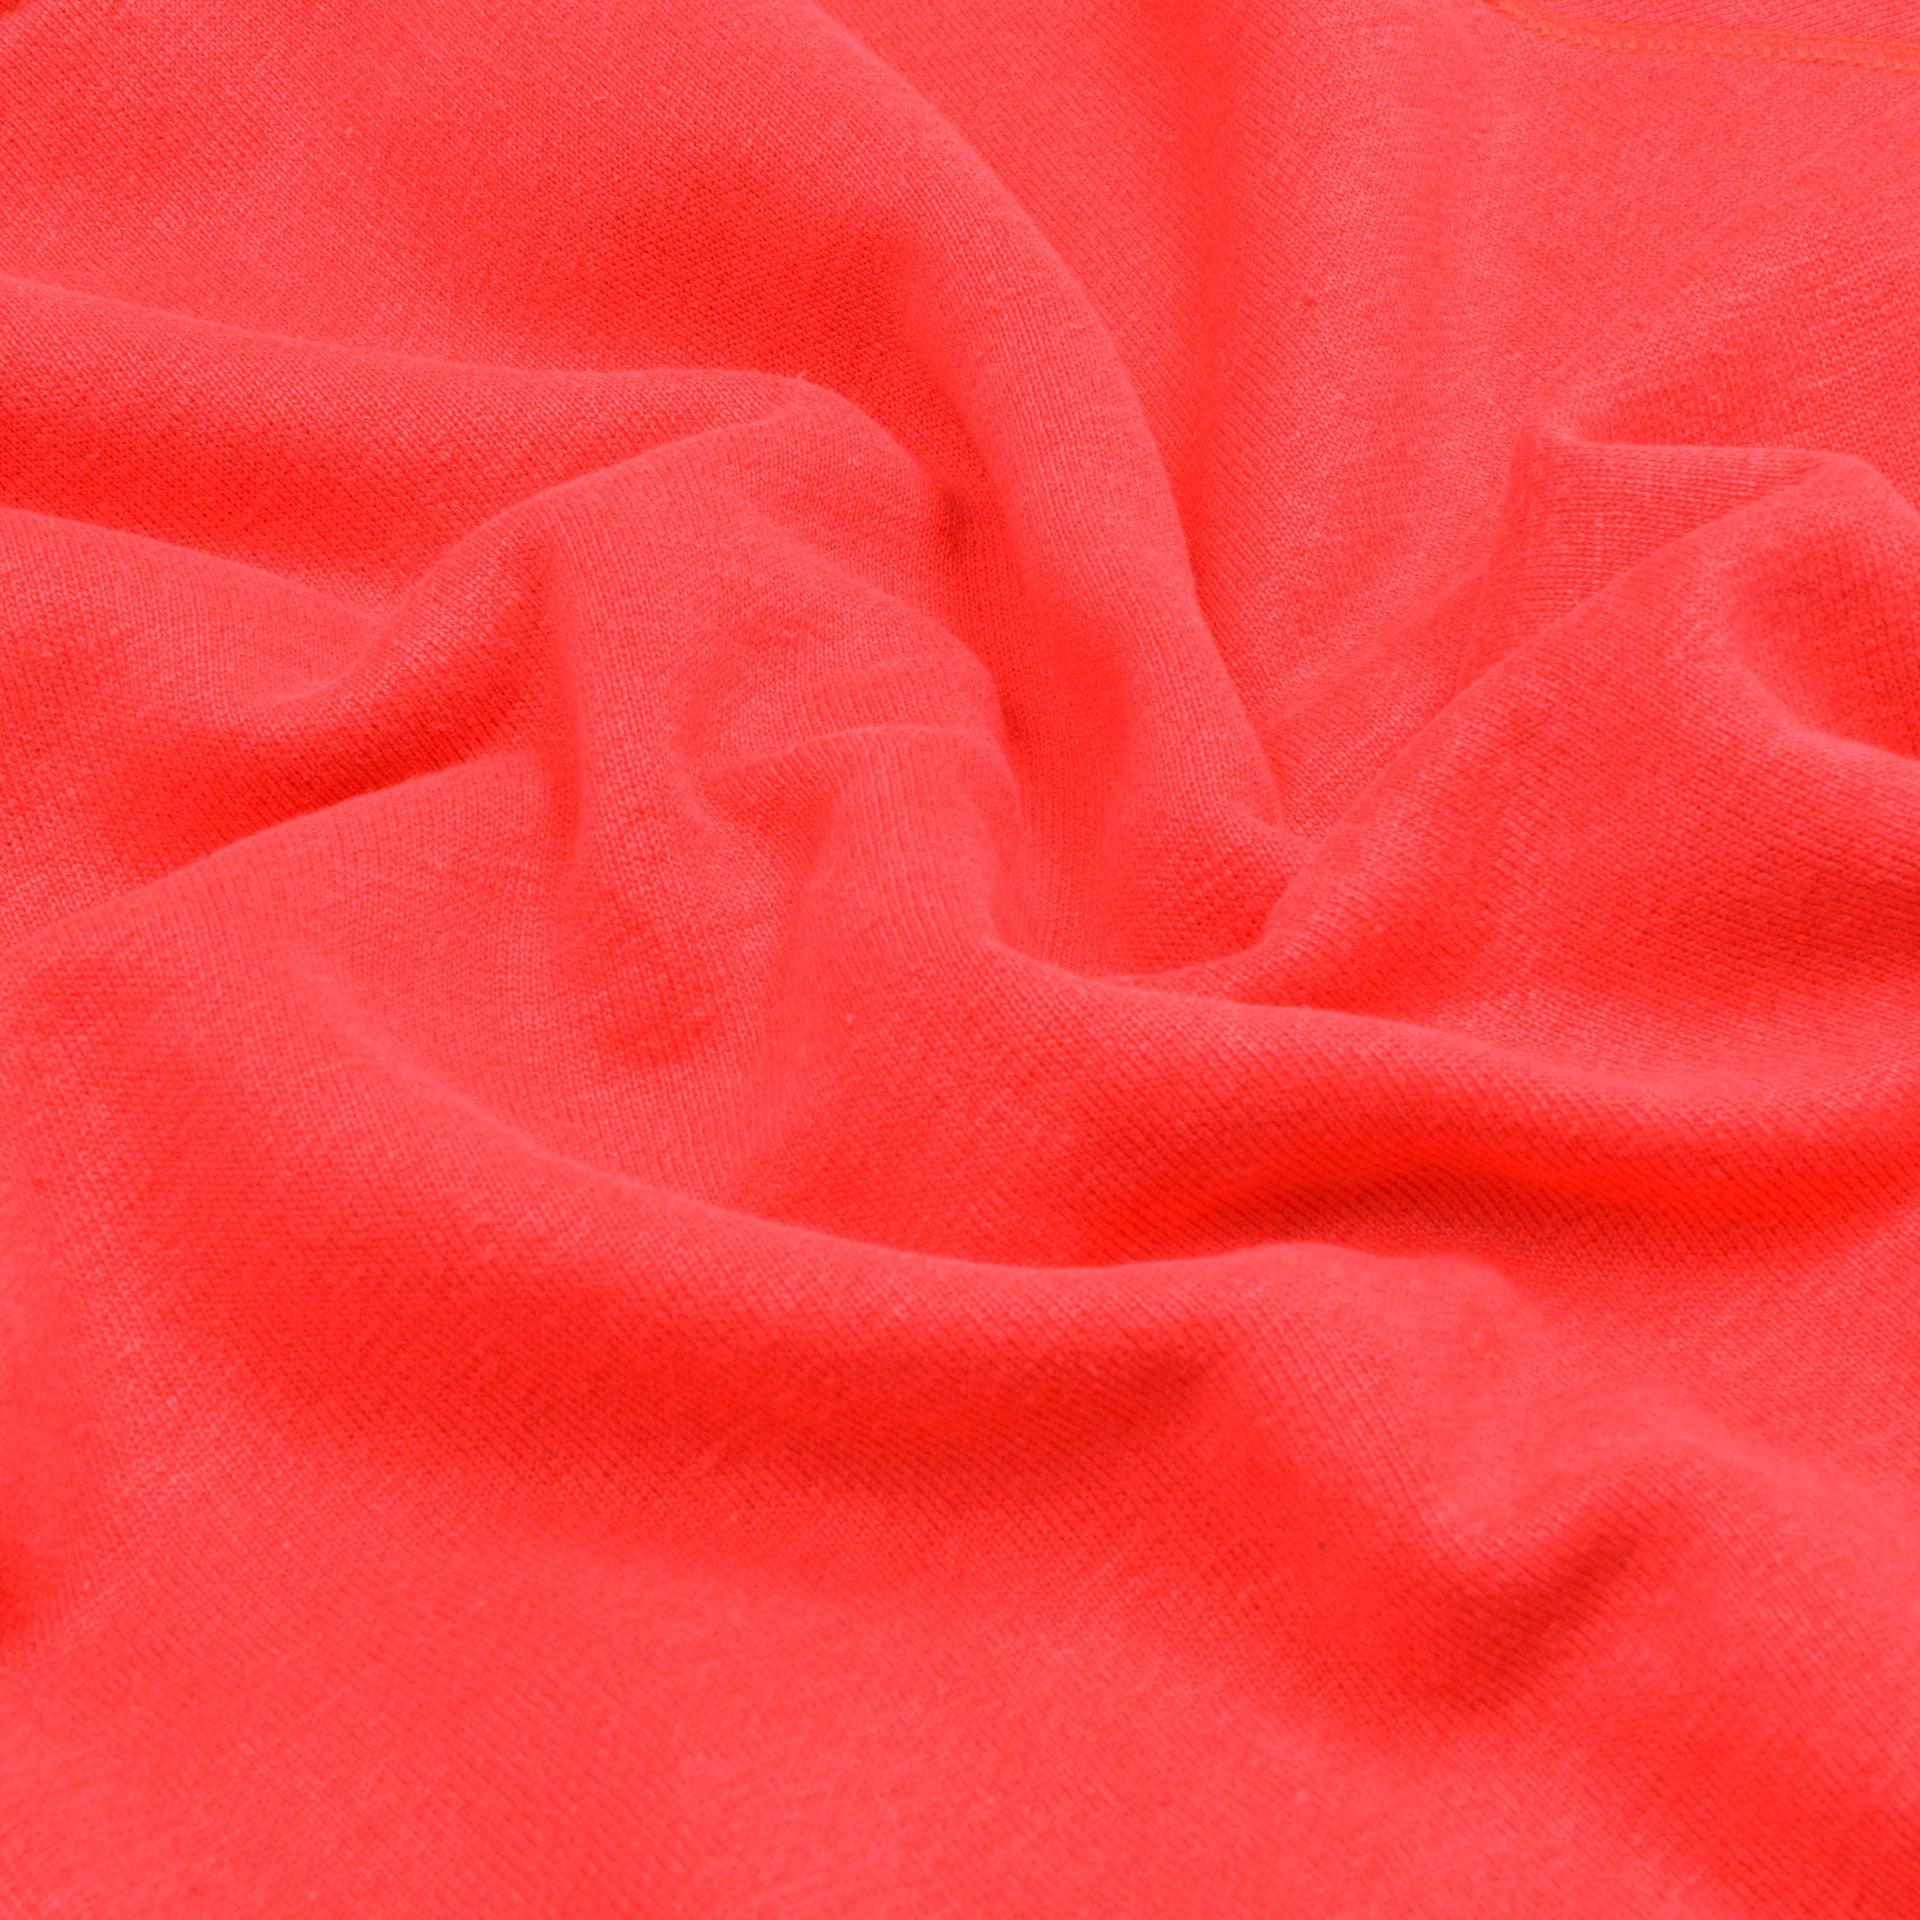 Red Rouge hoodie quality hemp material zoomed in